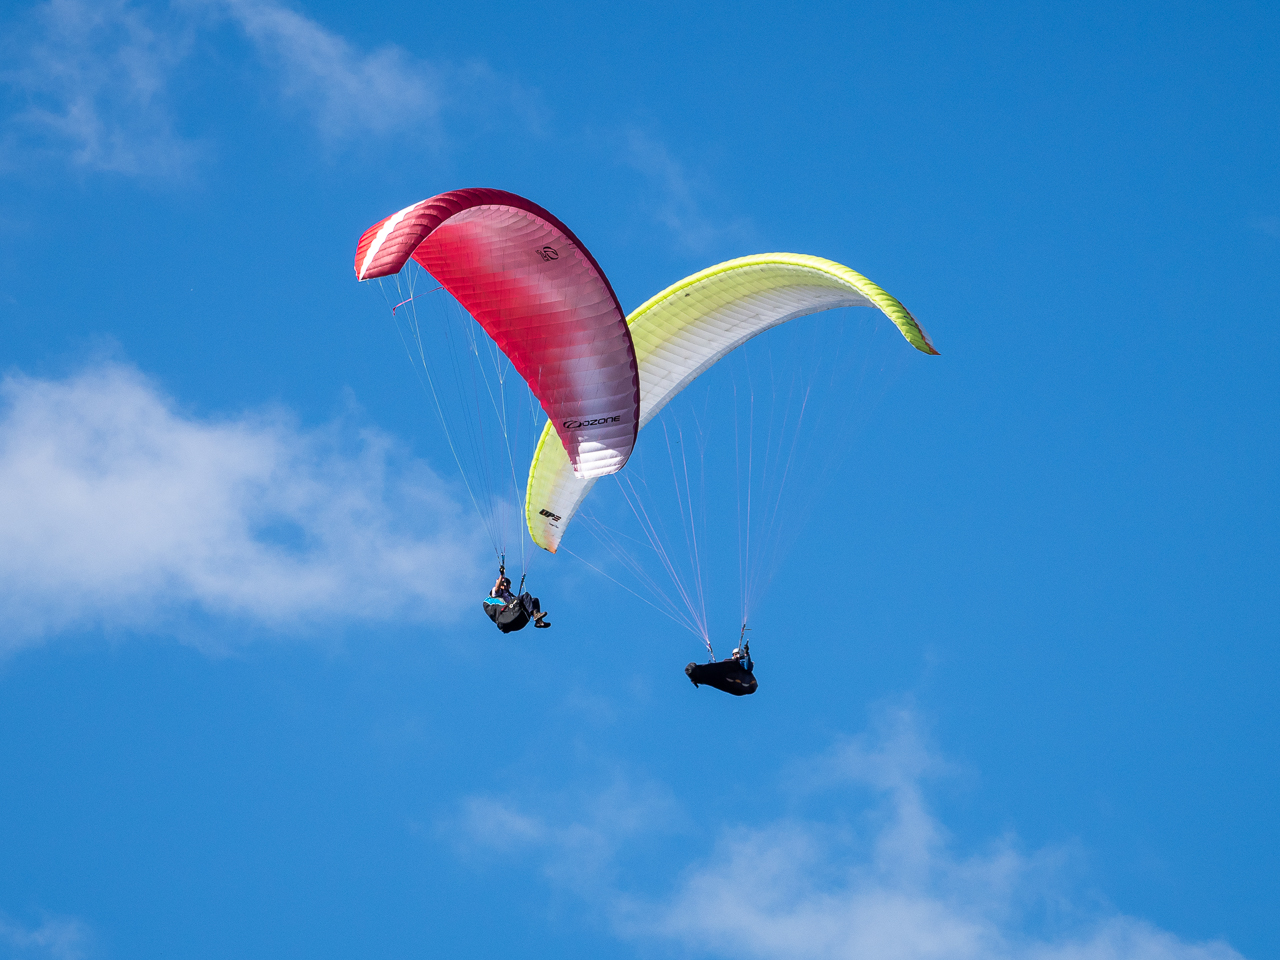 Paragliders fly from the Litlington White Horse, a monument in the Cuckmere Valley, East Sussex, England.